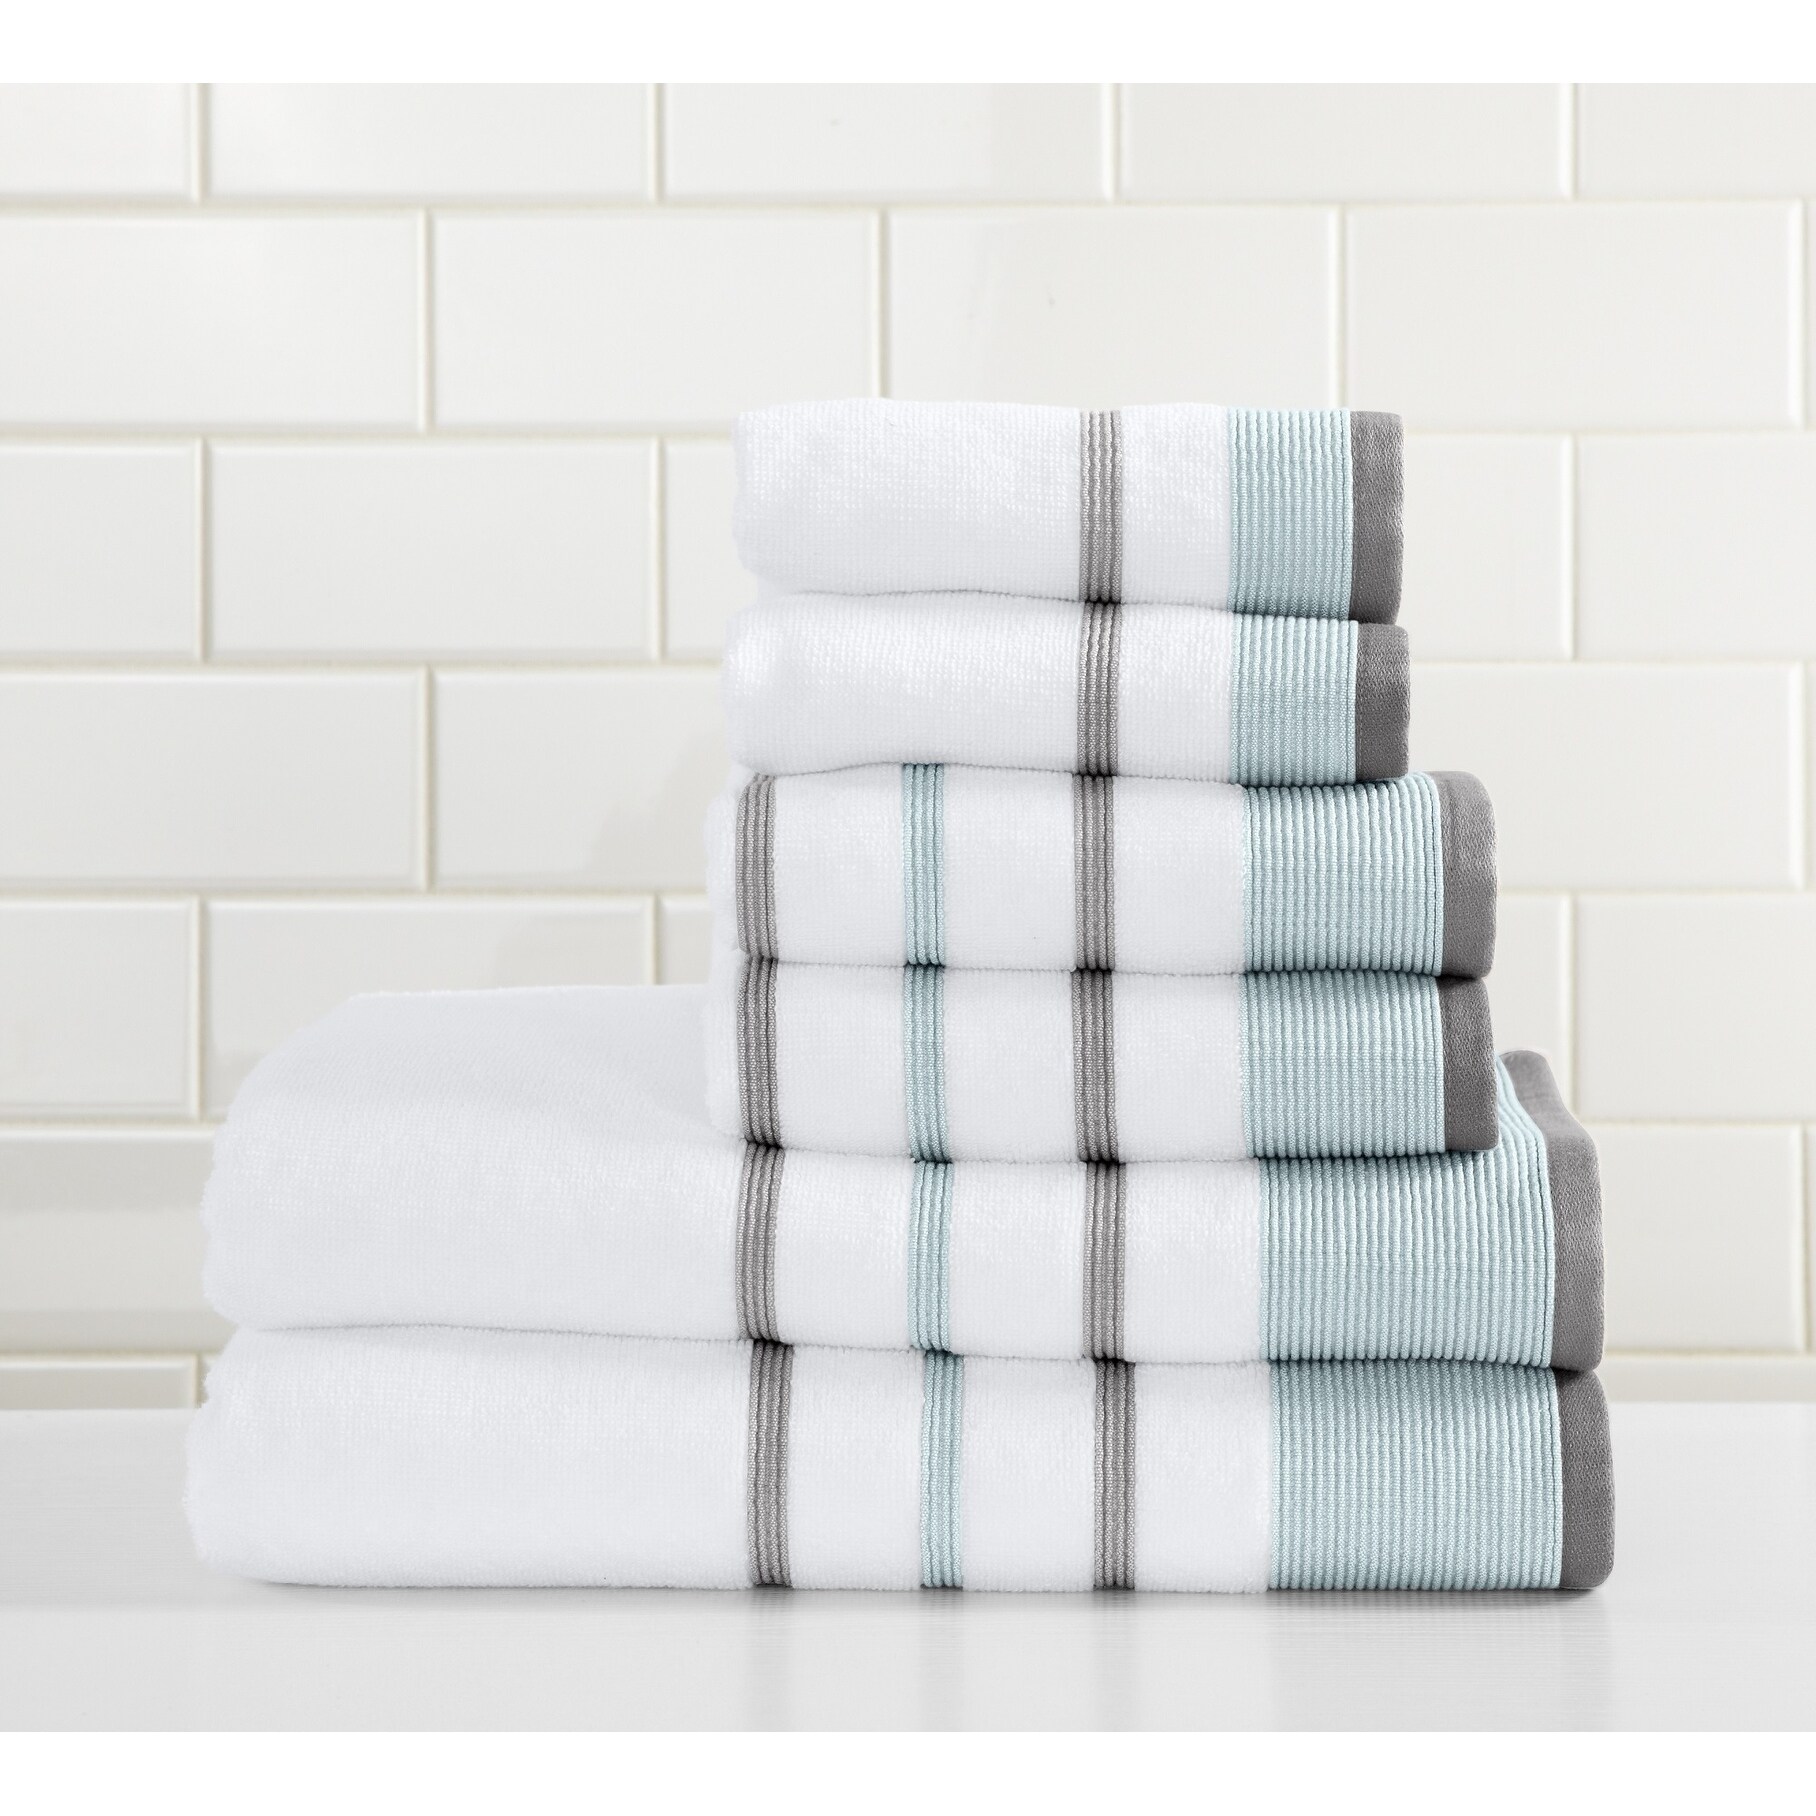 https://ak1.ostkcdn.com/images/products/17740360/Noelle-Collection-6-Piece-Turkish-Cotton-Striped-Towel-Set-4fd4aec0-637a-42b6-9838-877e16ecef50.jpg